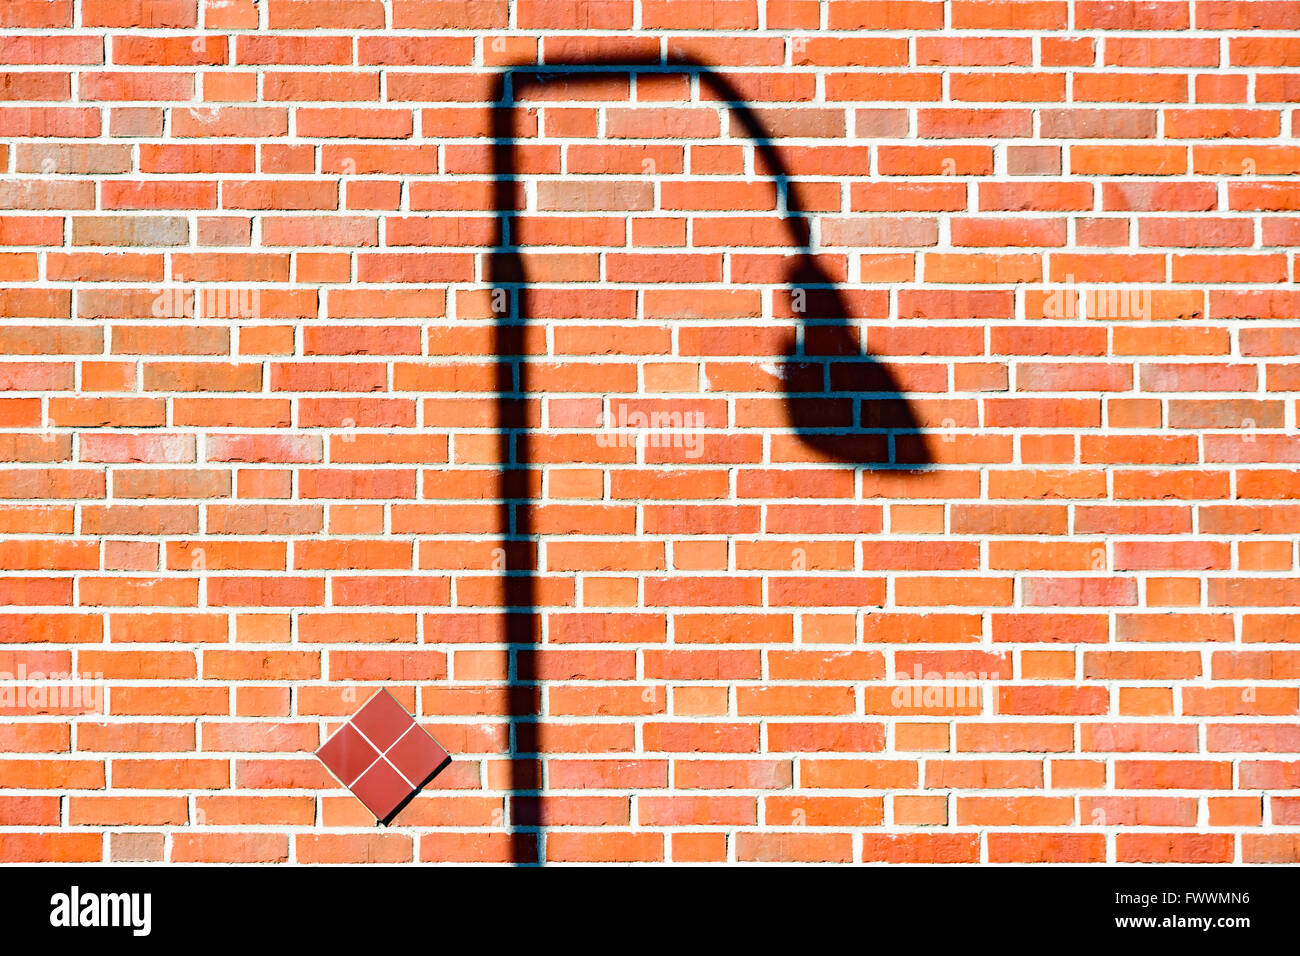 Dark lamppost shadow falling on a red brick wall. Stock Photo